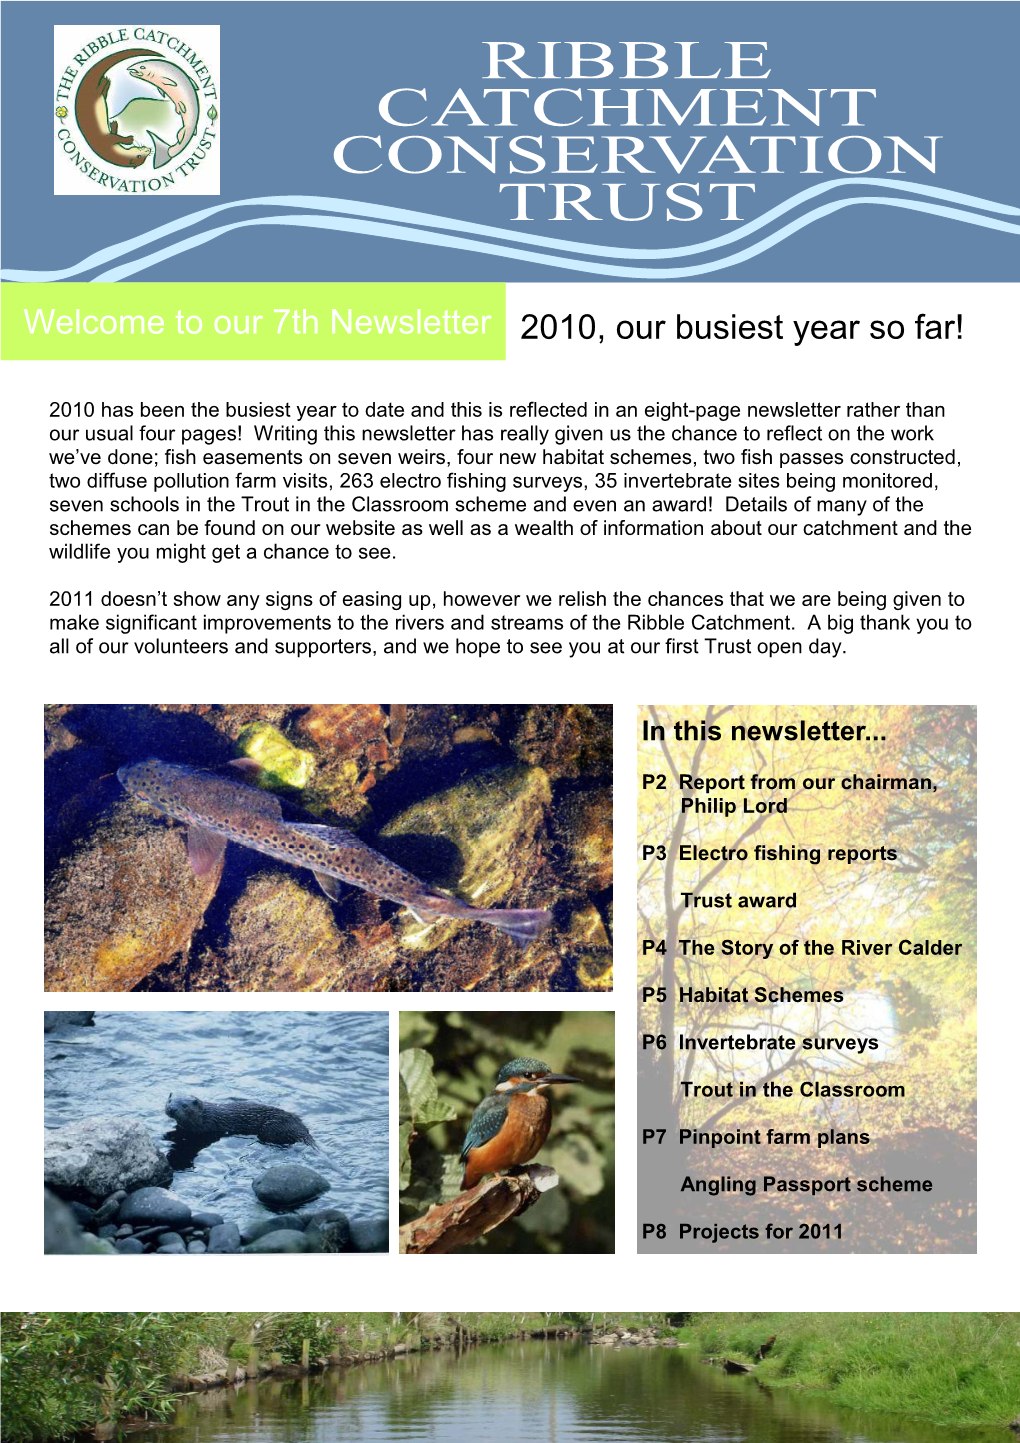 Newsletter 2010, Our Busiest Year So Far!